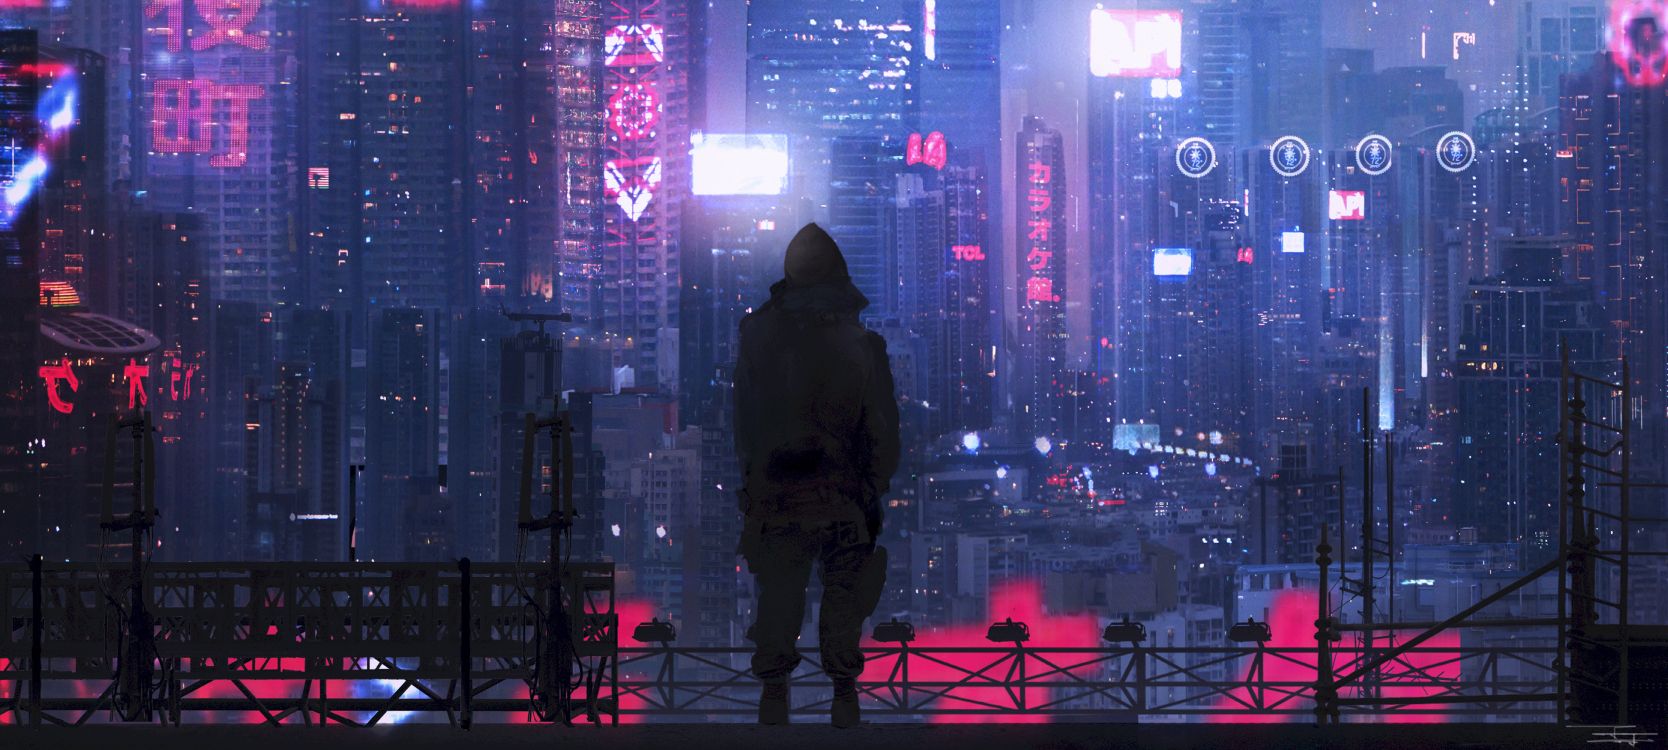 Man in Black Hoodie Standing on The Top of The Building During Night Time. Wallpaper in 7785x3500 Resolution